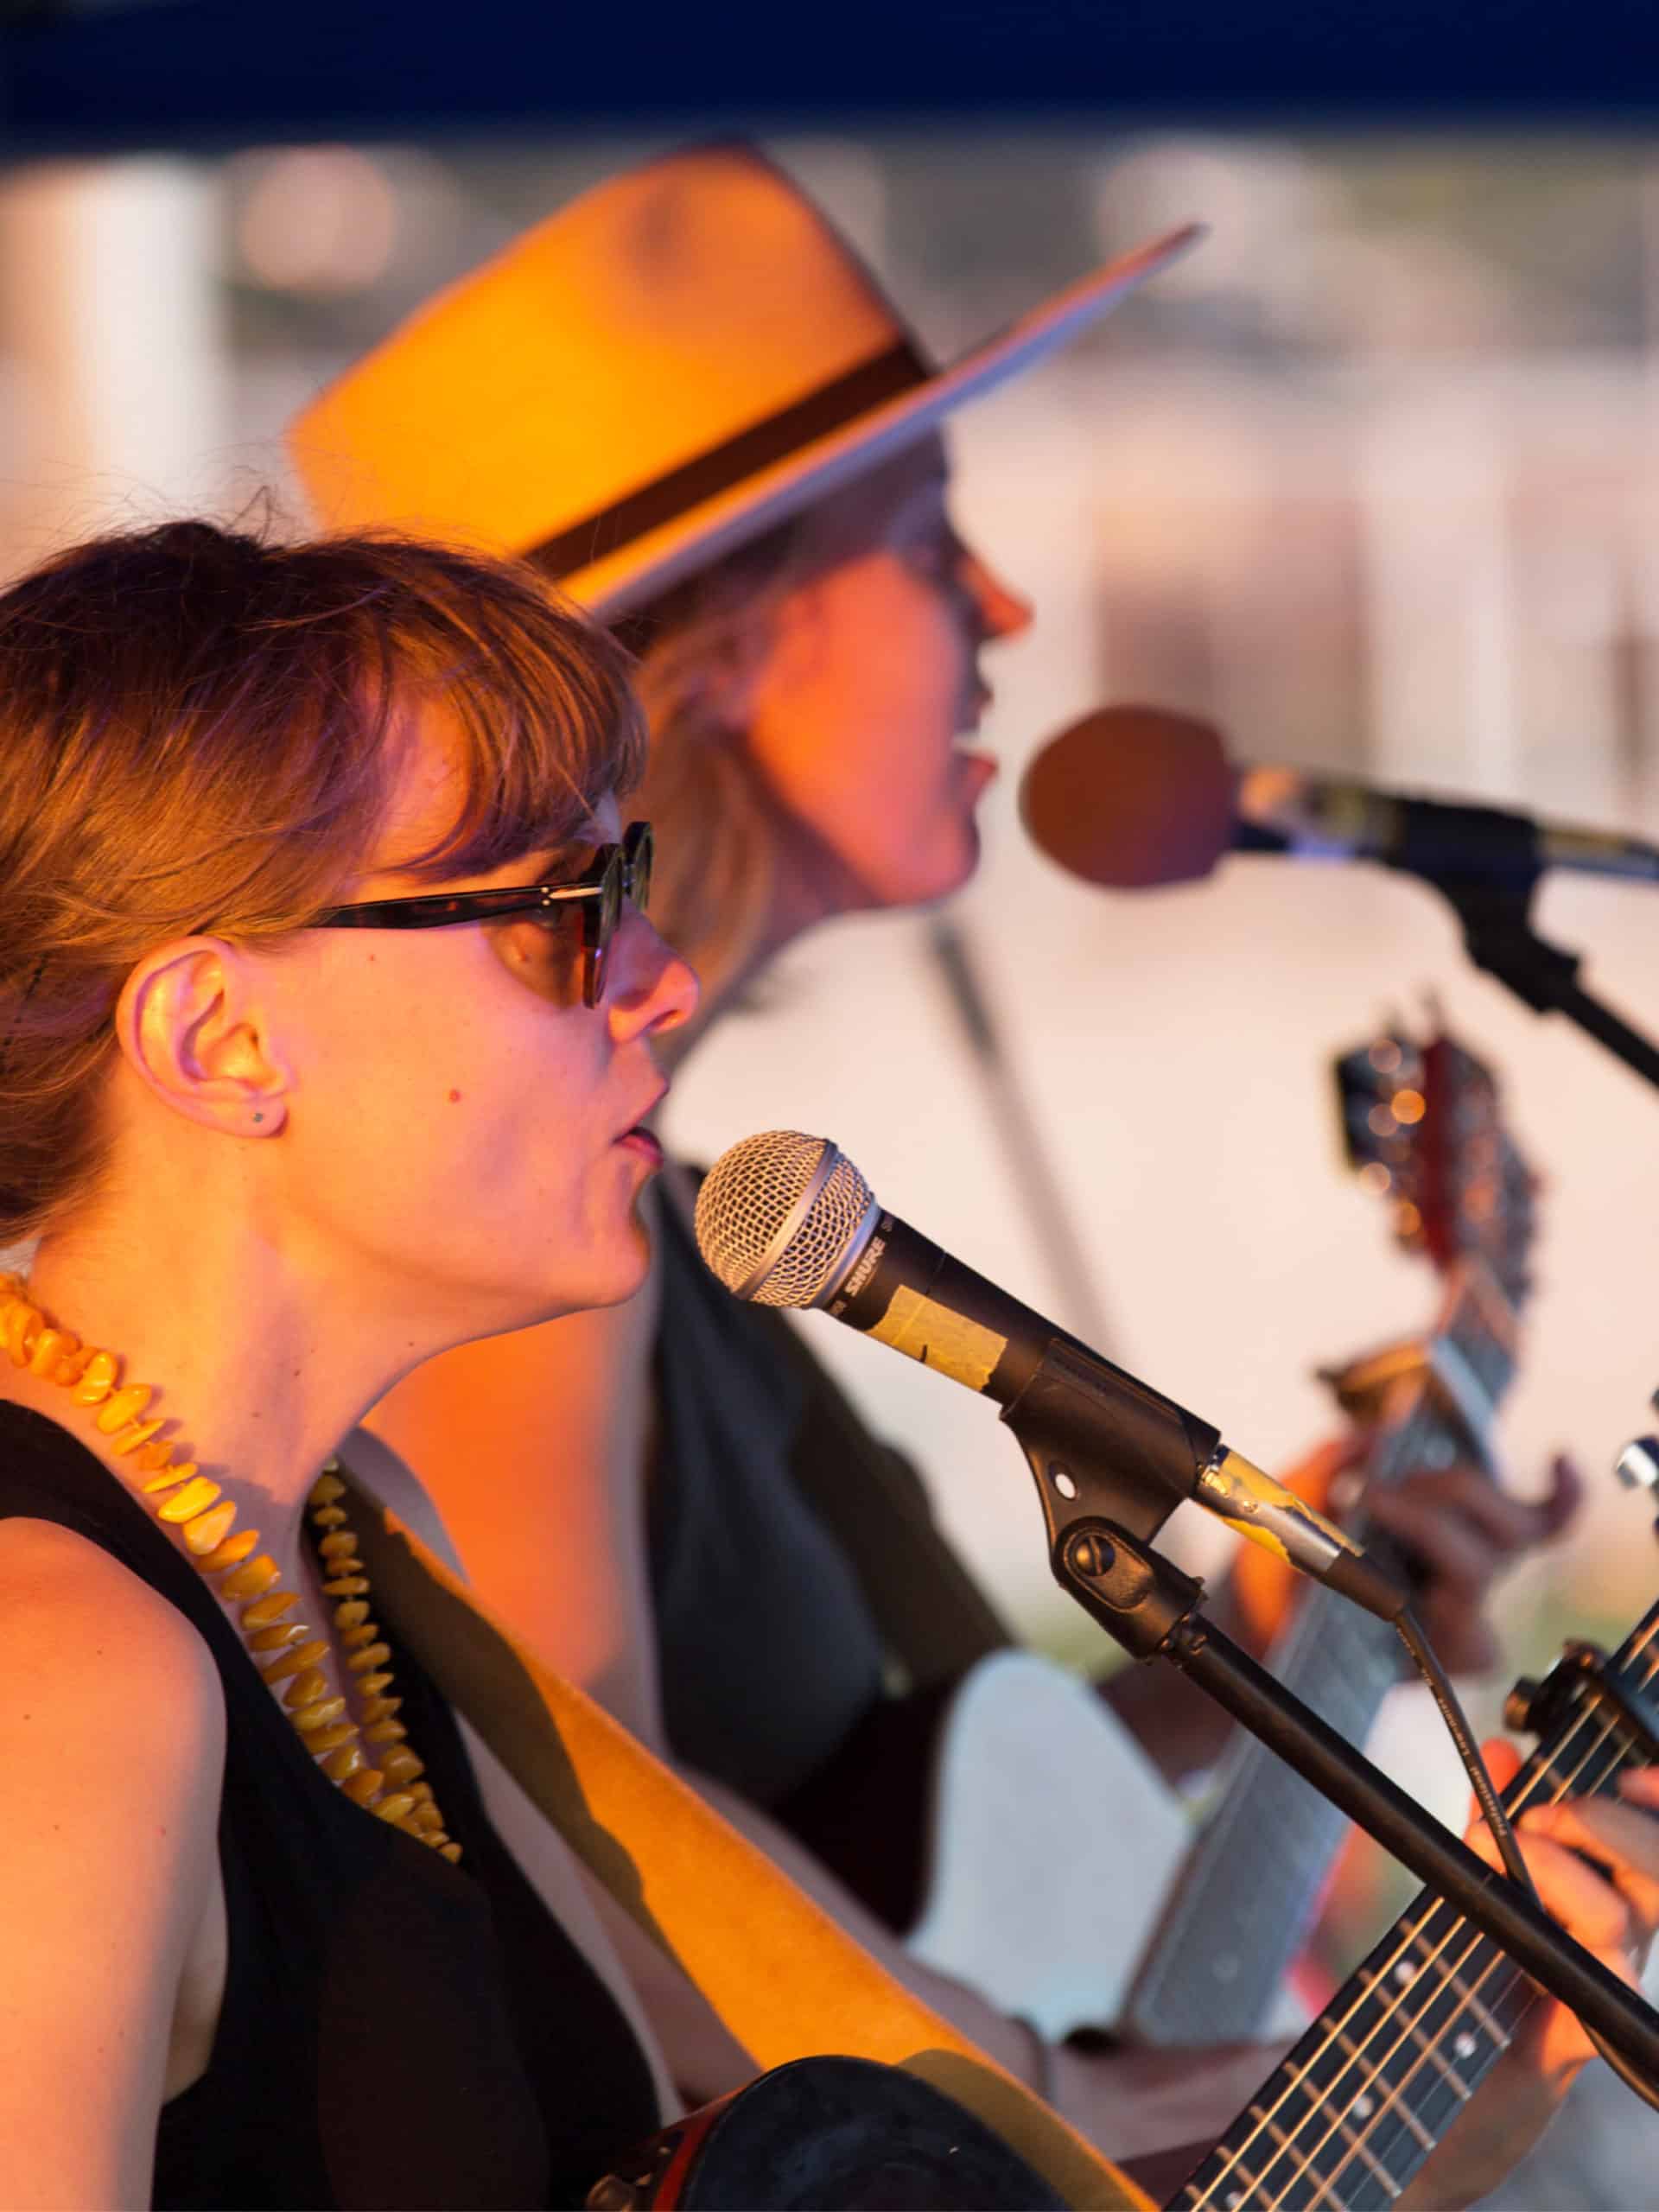 Two women singing into microphones at sunset.